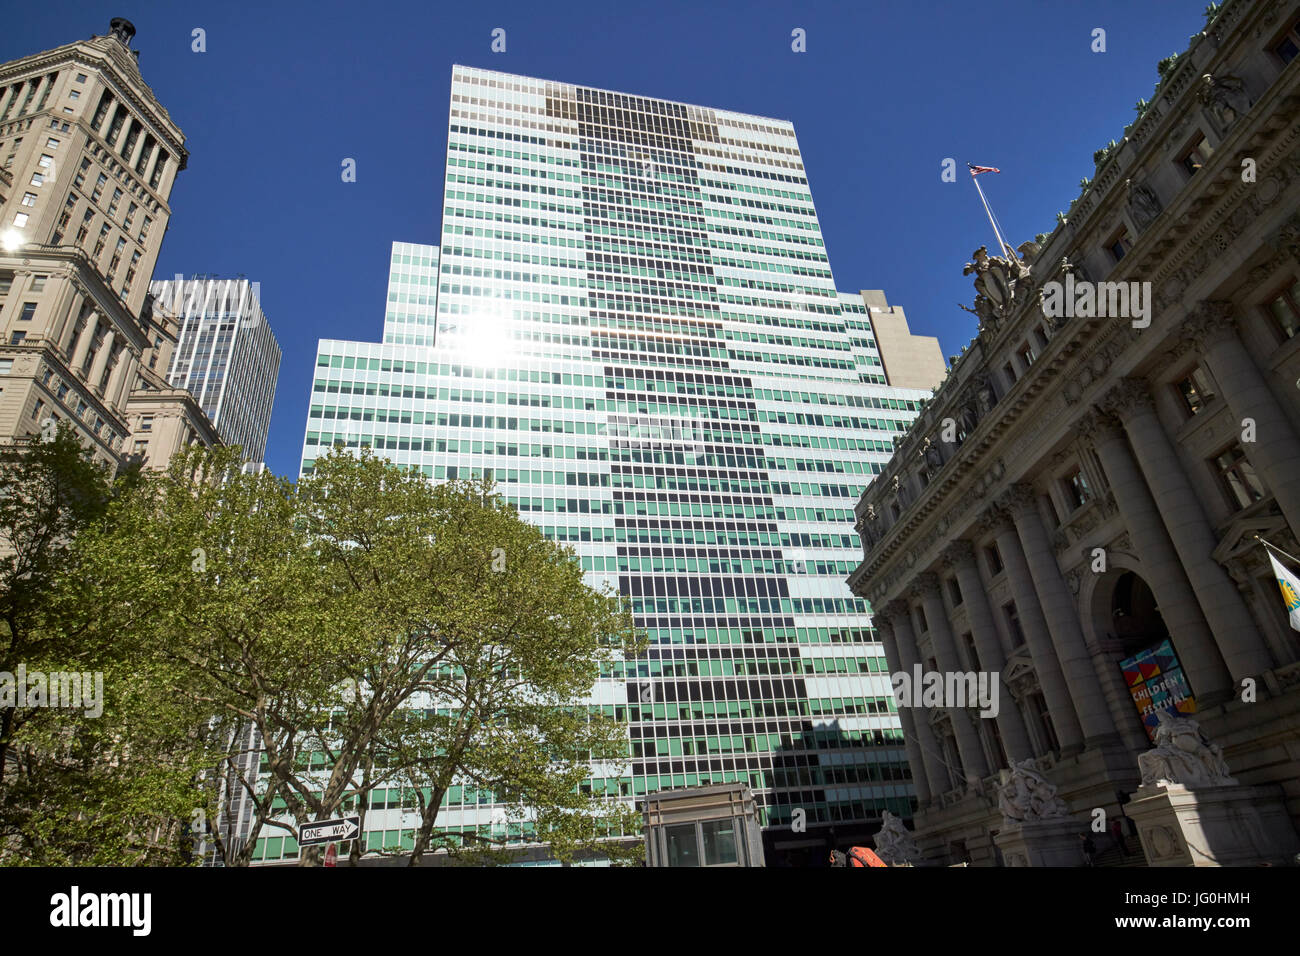 bowling green and 2 broadway with the alexander hamilton custom house New York City USA Stock Photo